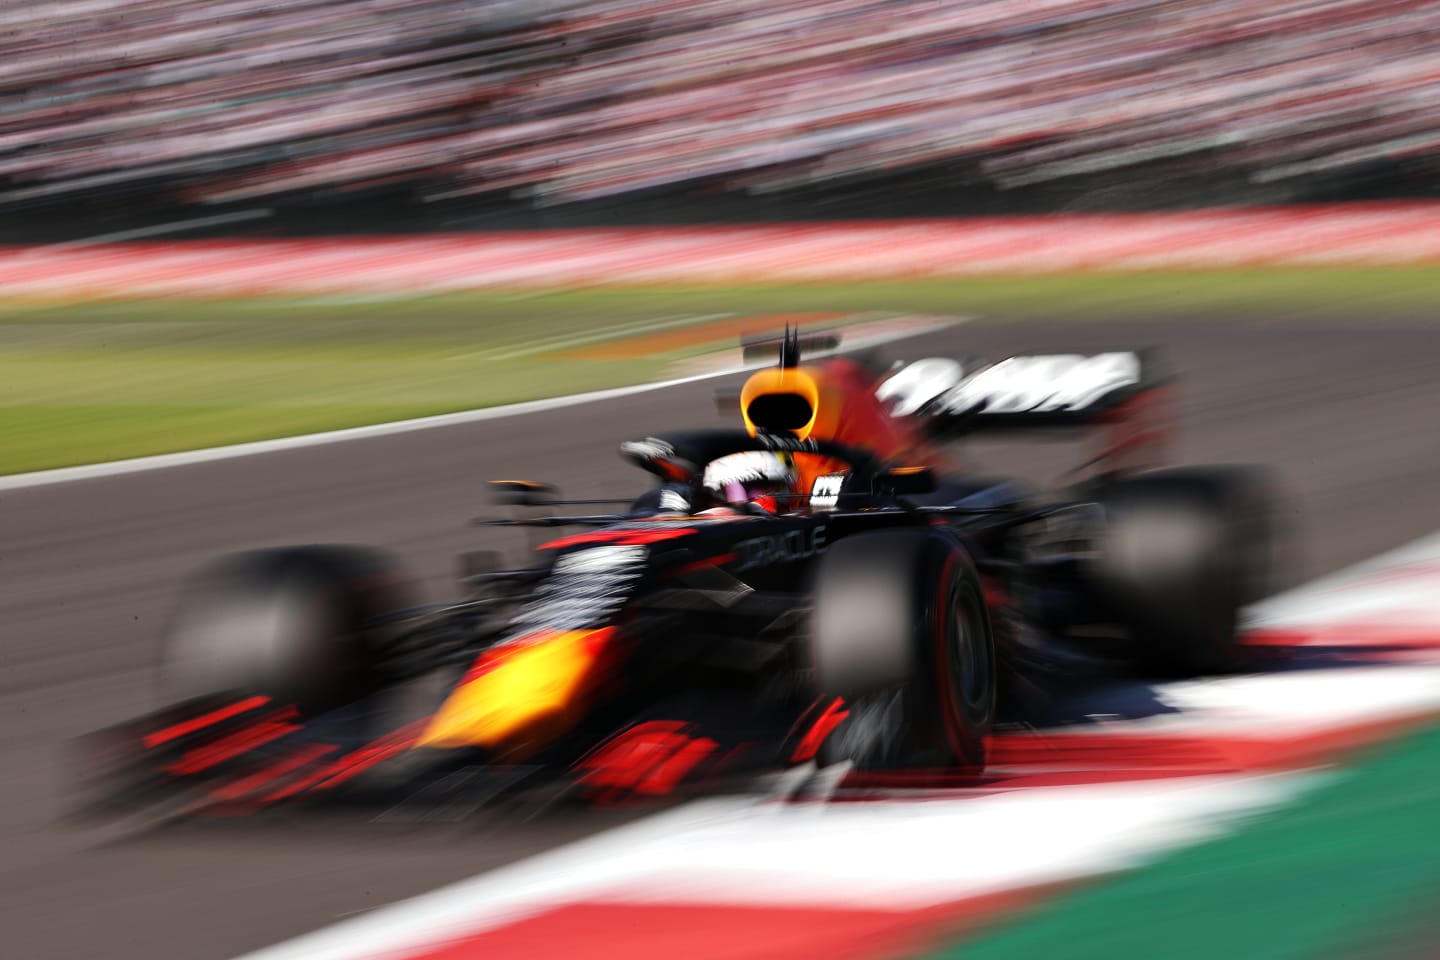 MEXICO CITY, MEXICO - NOVEMBER 06: Max Verstappen of the Netherlands driving the (33) Red Bull Racing RB16B Honda during qualifying ahead of the F1 Grand Prix of Mexico at Autodromo Hermanos Rodriguez on November 06, 2021 in Mexico City, Mexico. (Photo by Lars Baron/Getty Images)